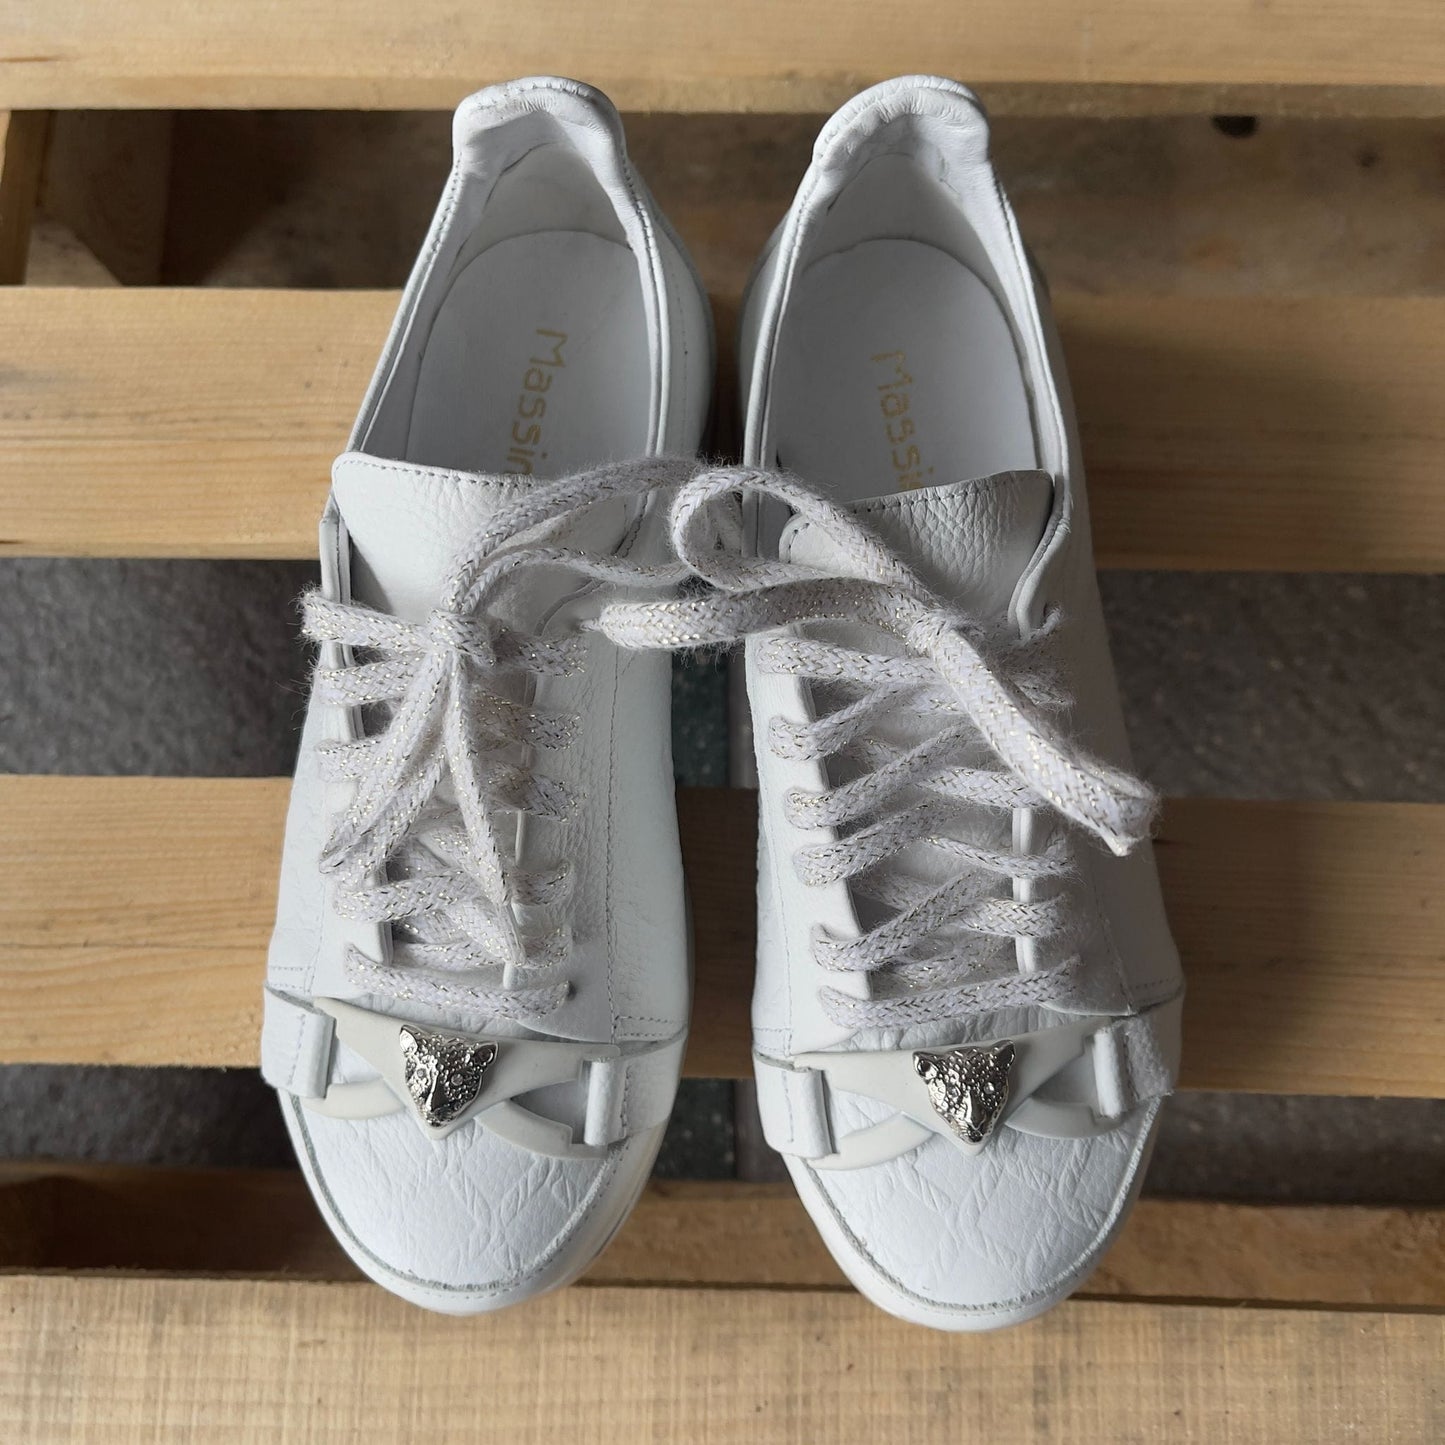 Petite platform sneakers in white leather set on a chunky sole